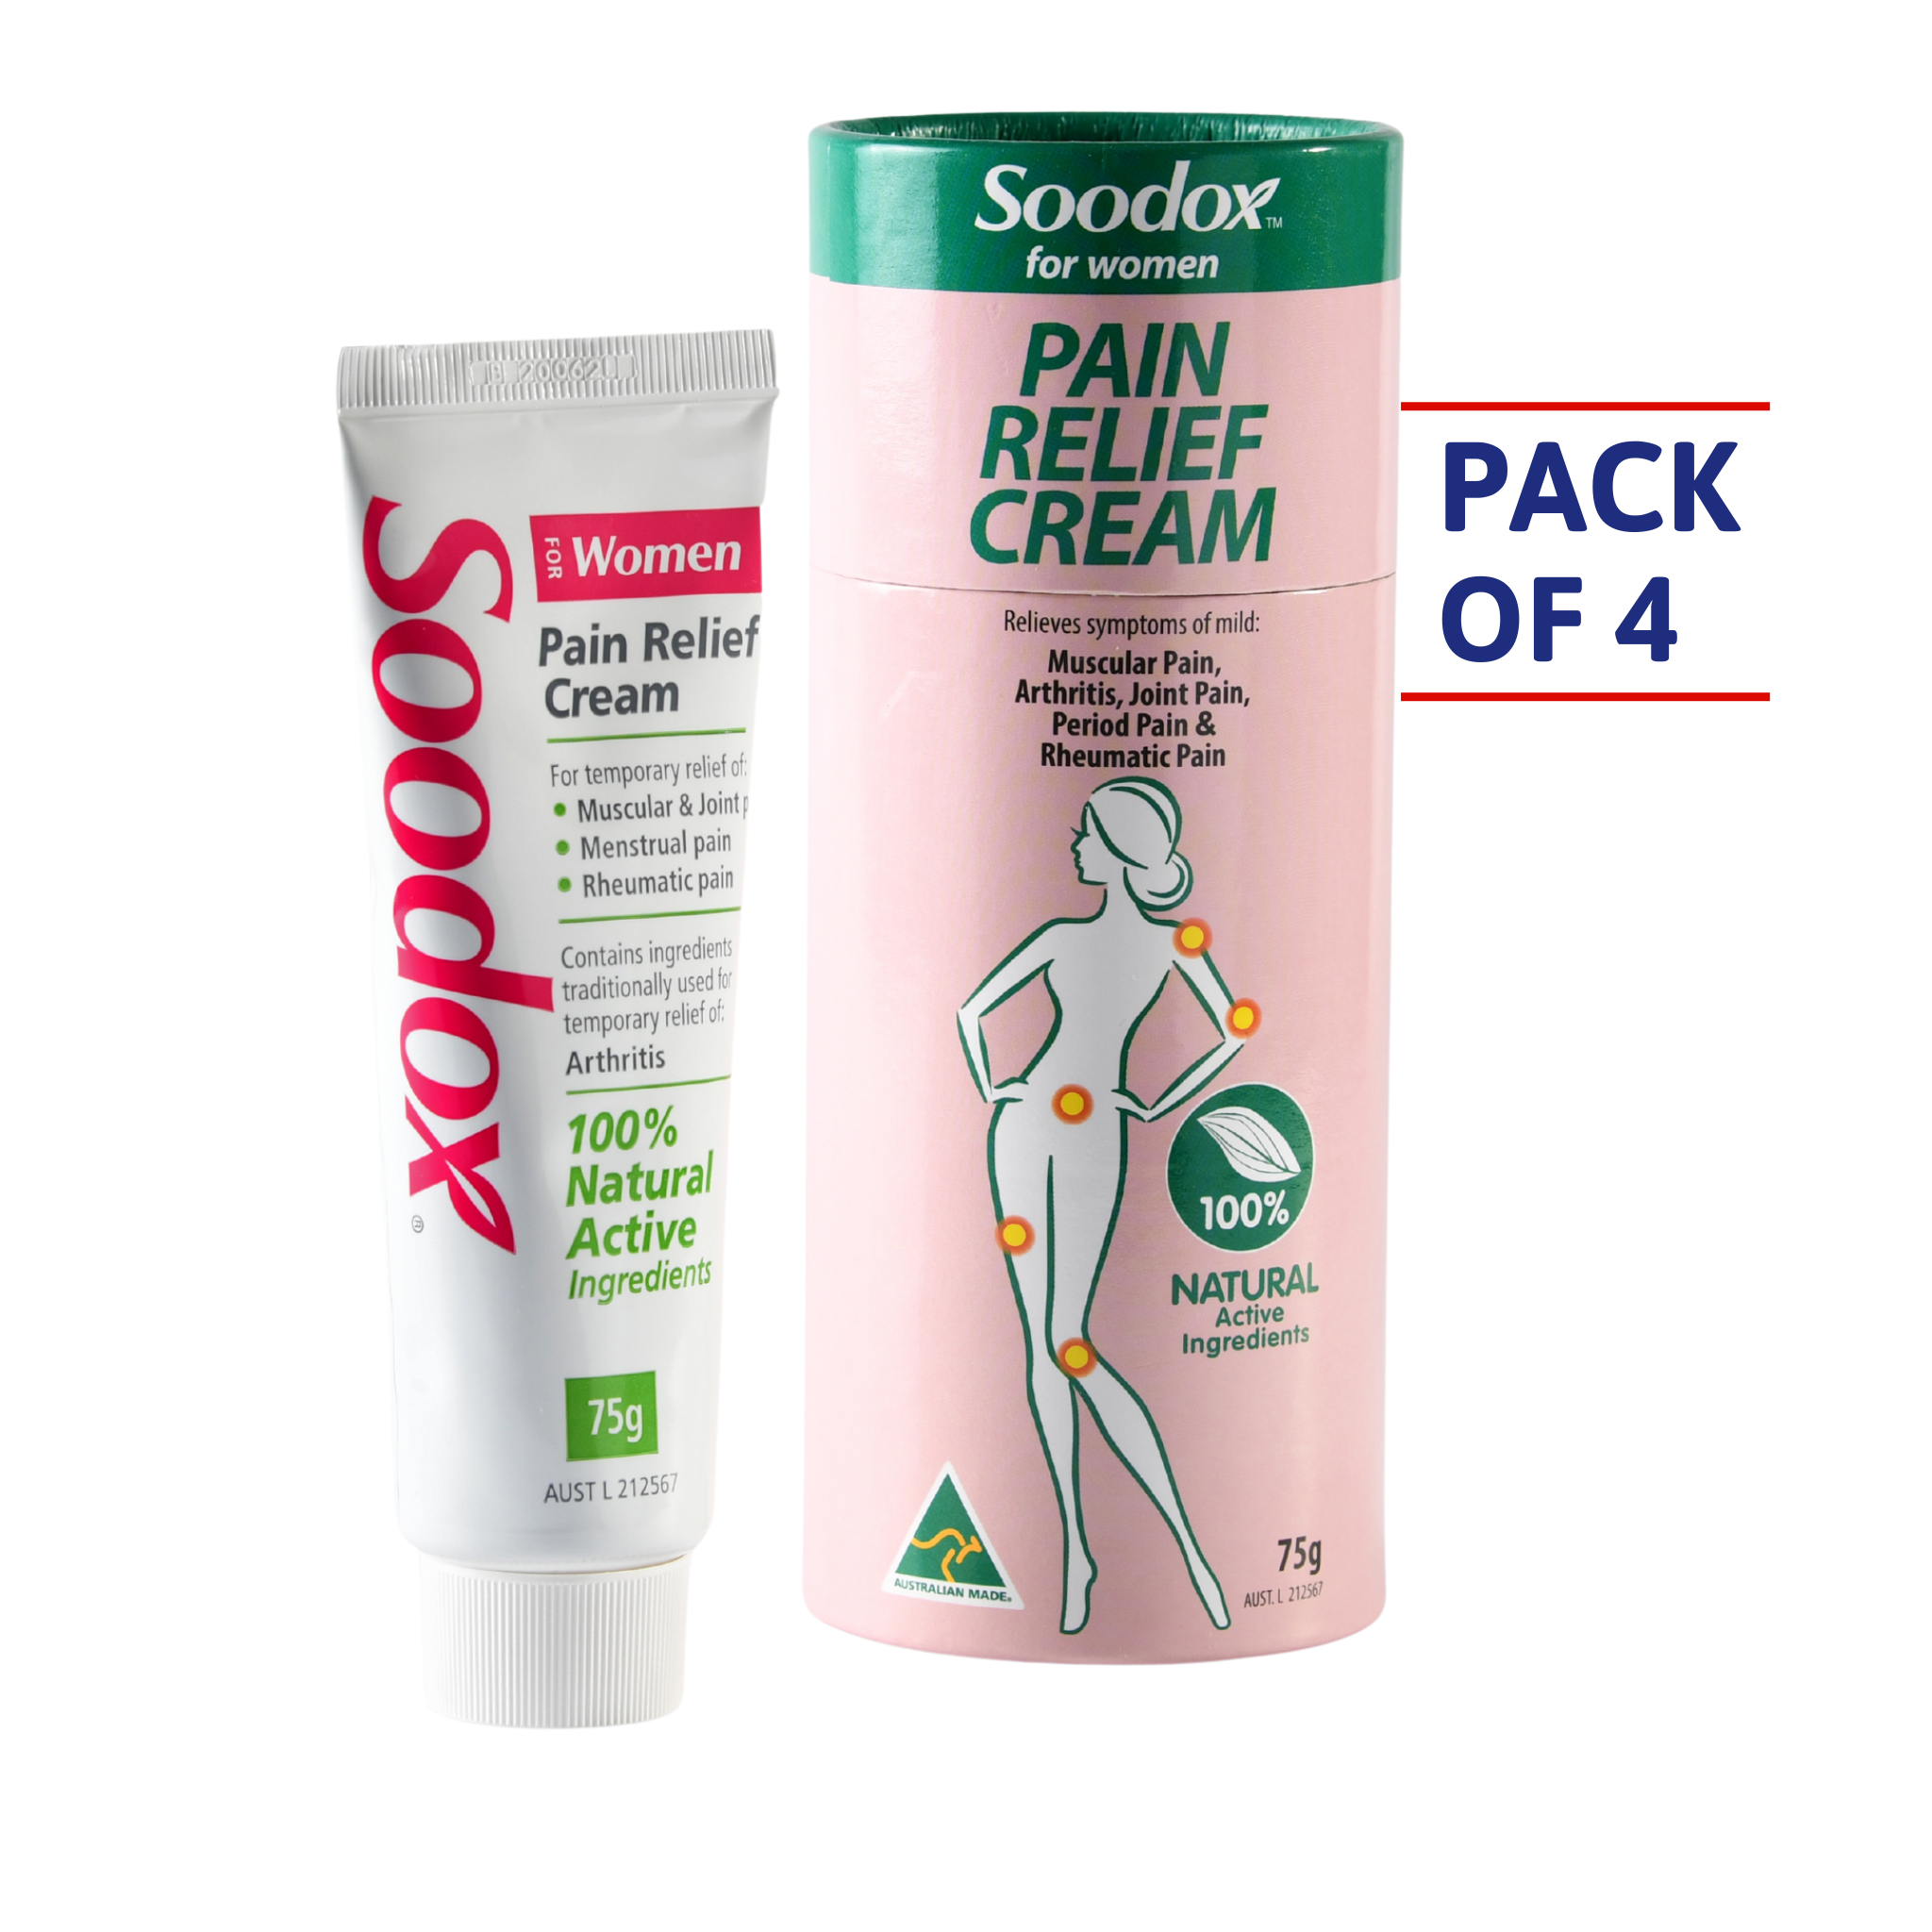 Soodox for Women pain relief cream pack of 4